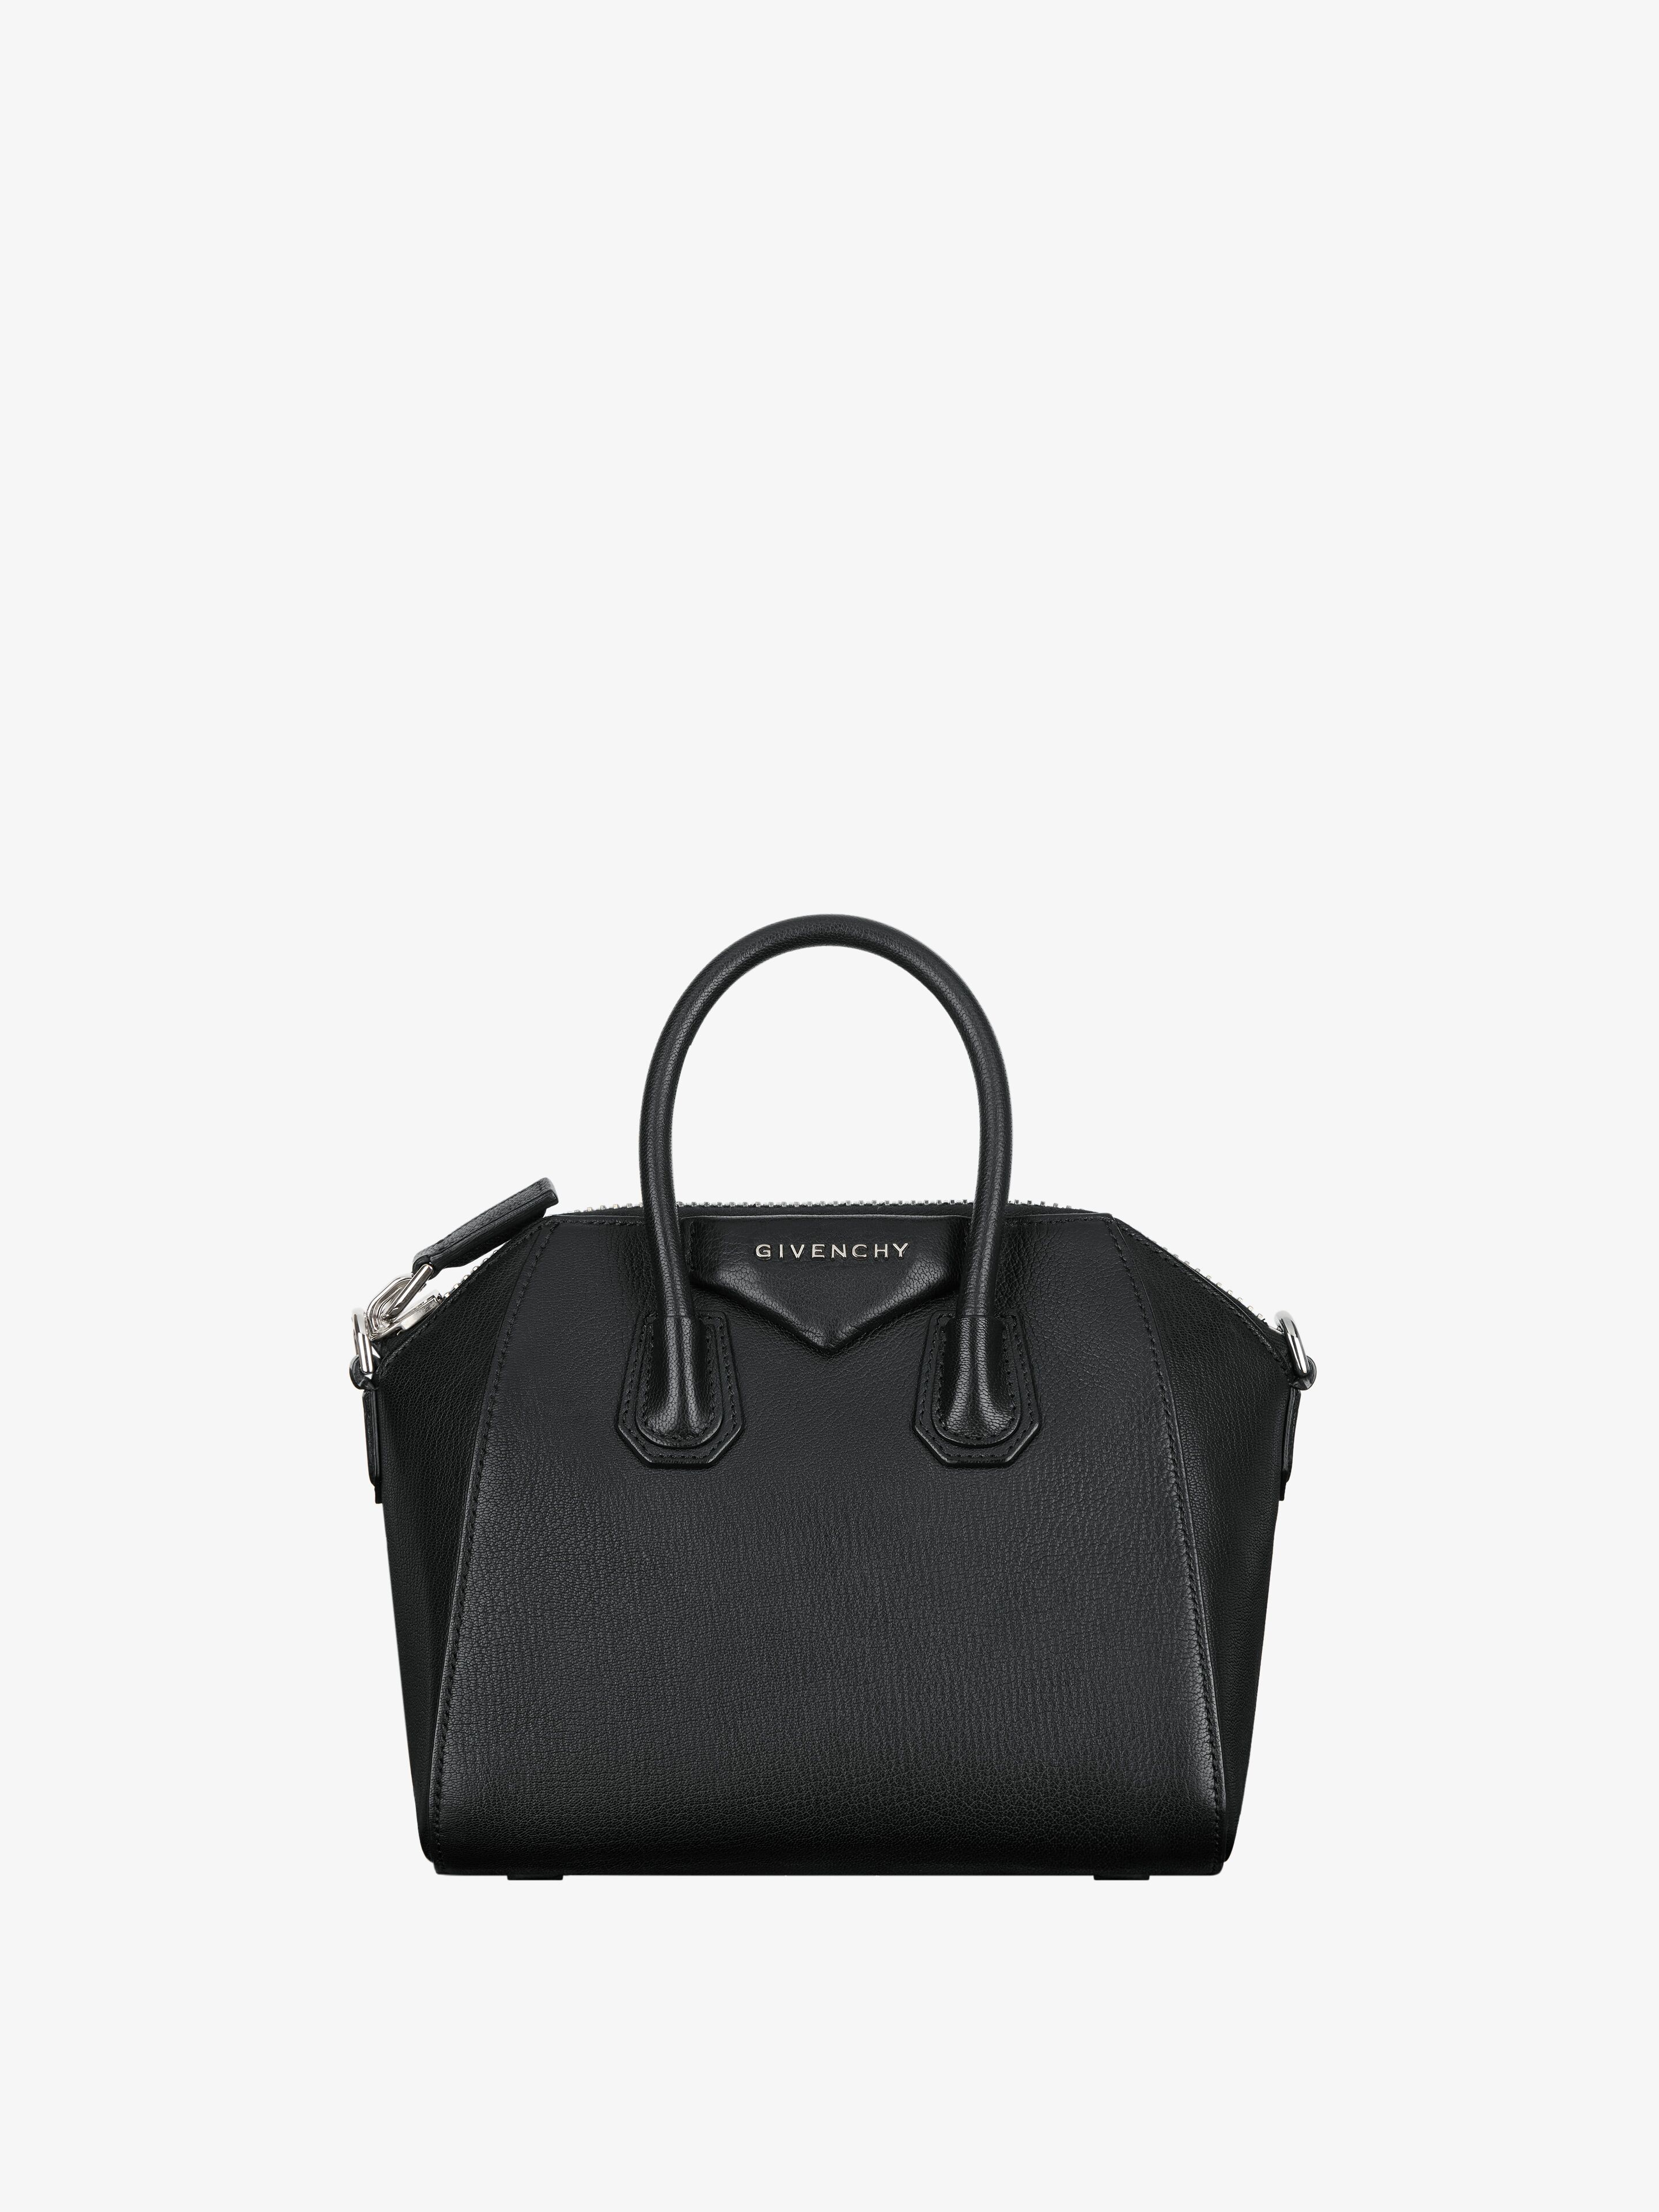 Givenchy Leather Crossbody Bag in Black - Meghan's Mirror